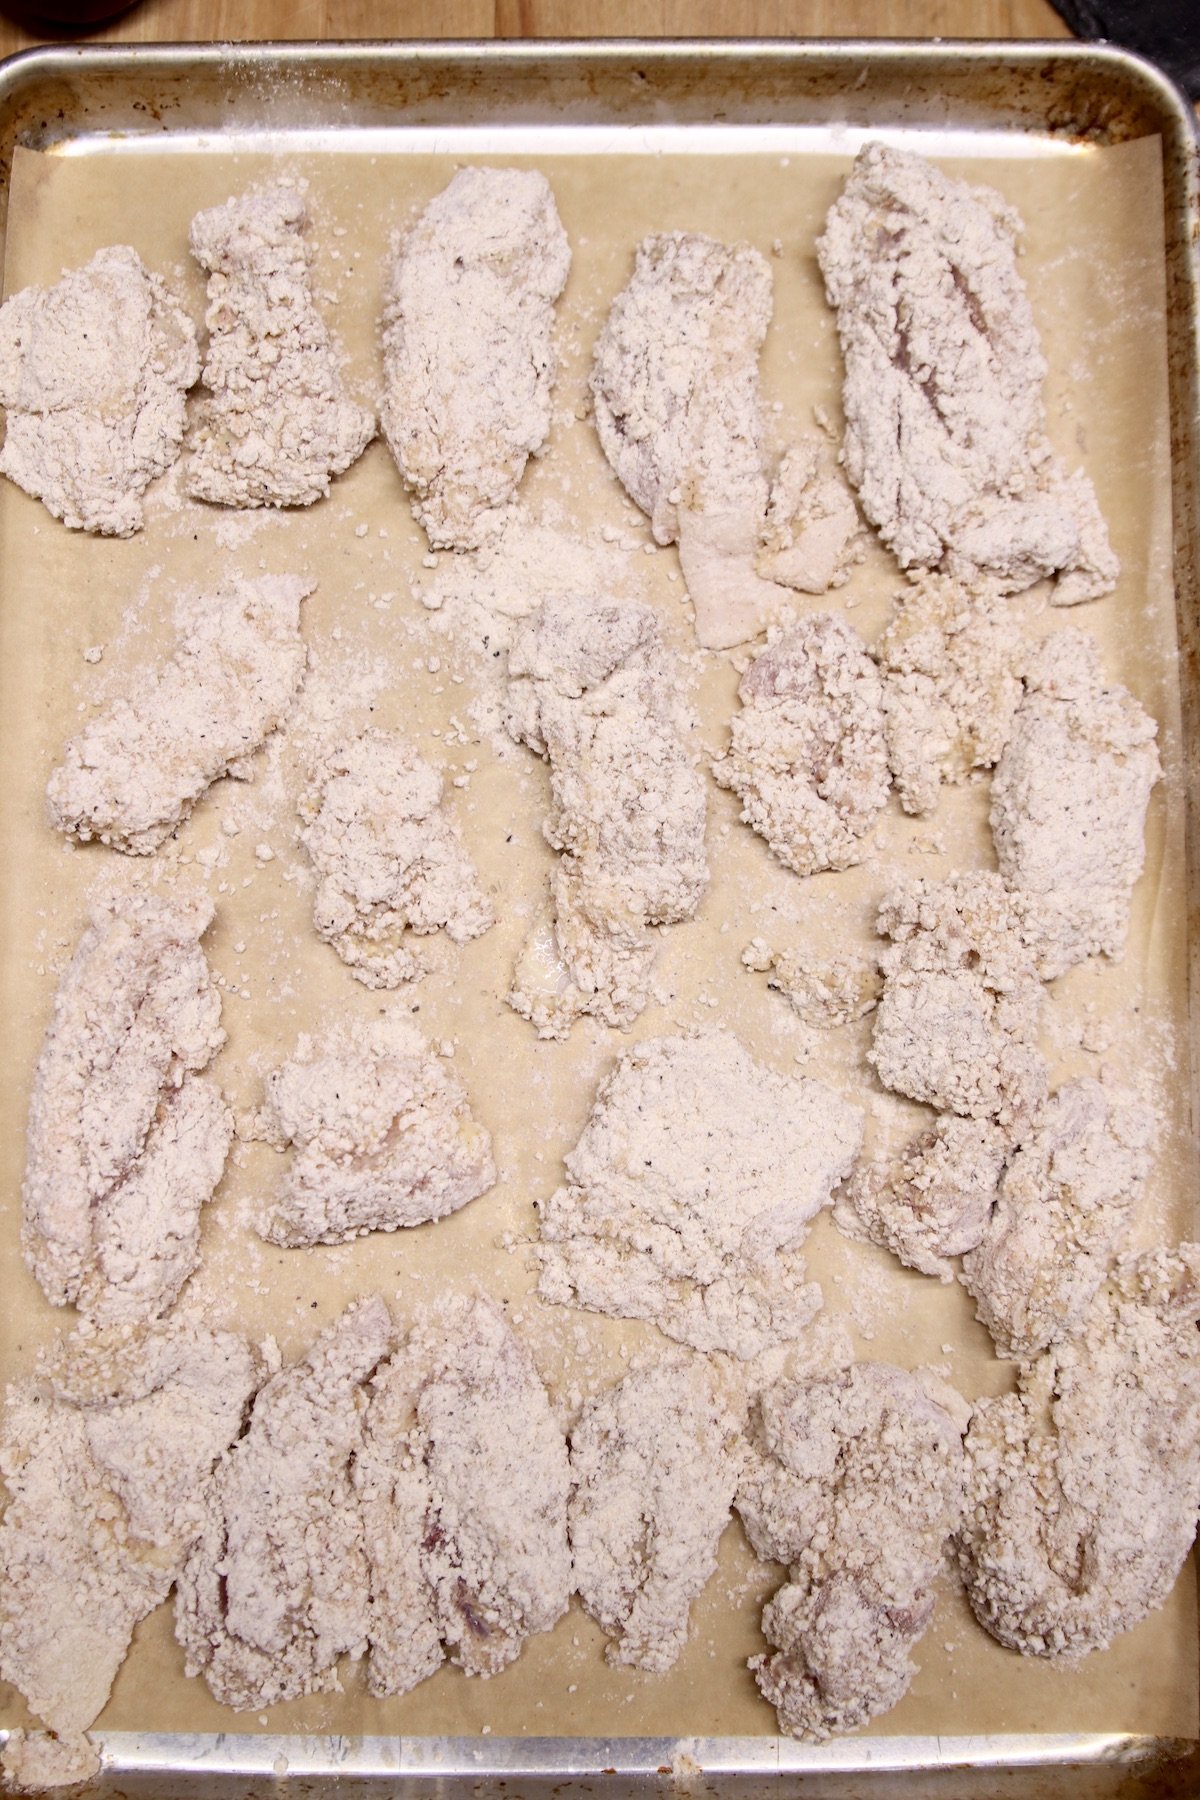 parchment lined baking sheet with breaded chicken for frying